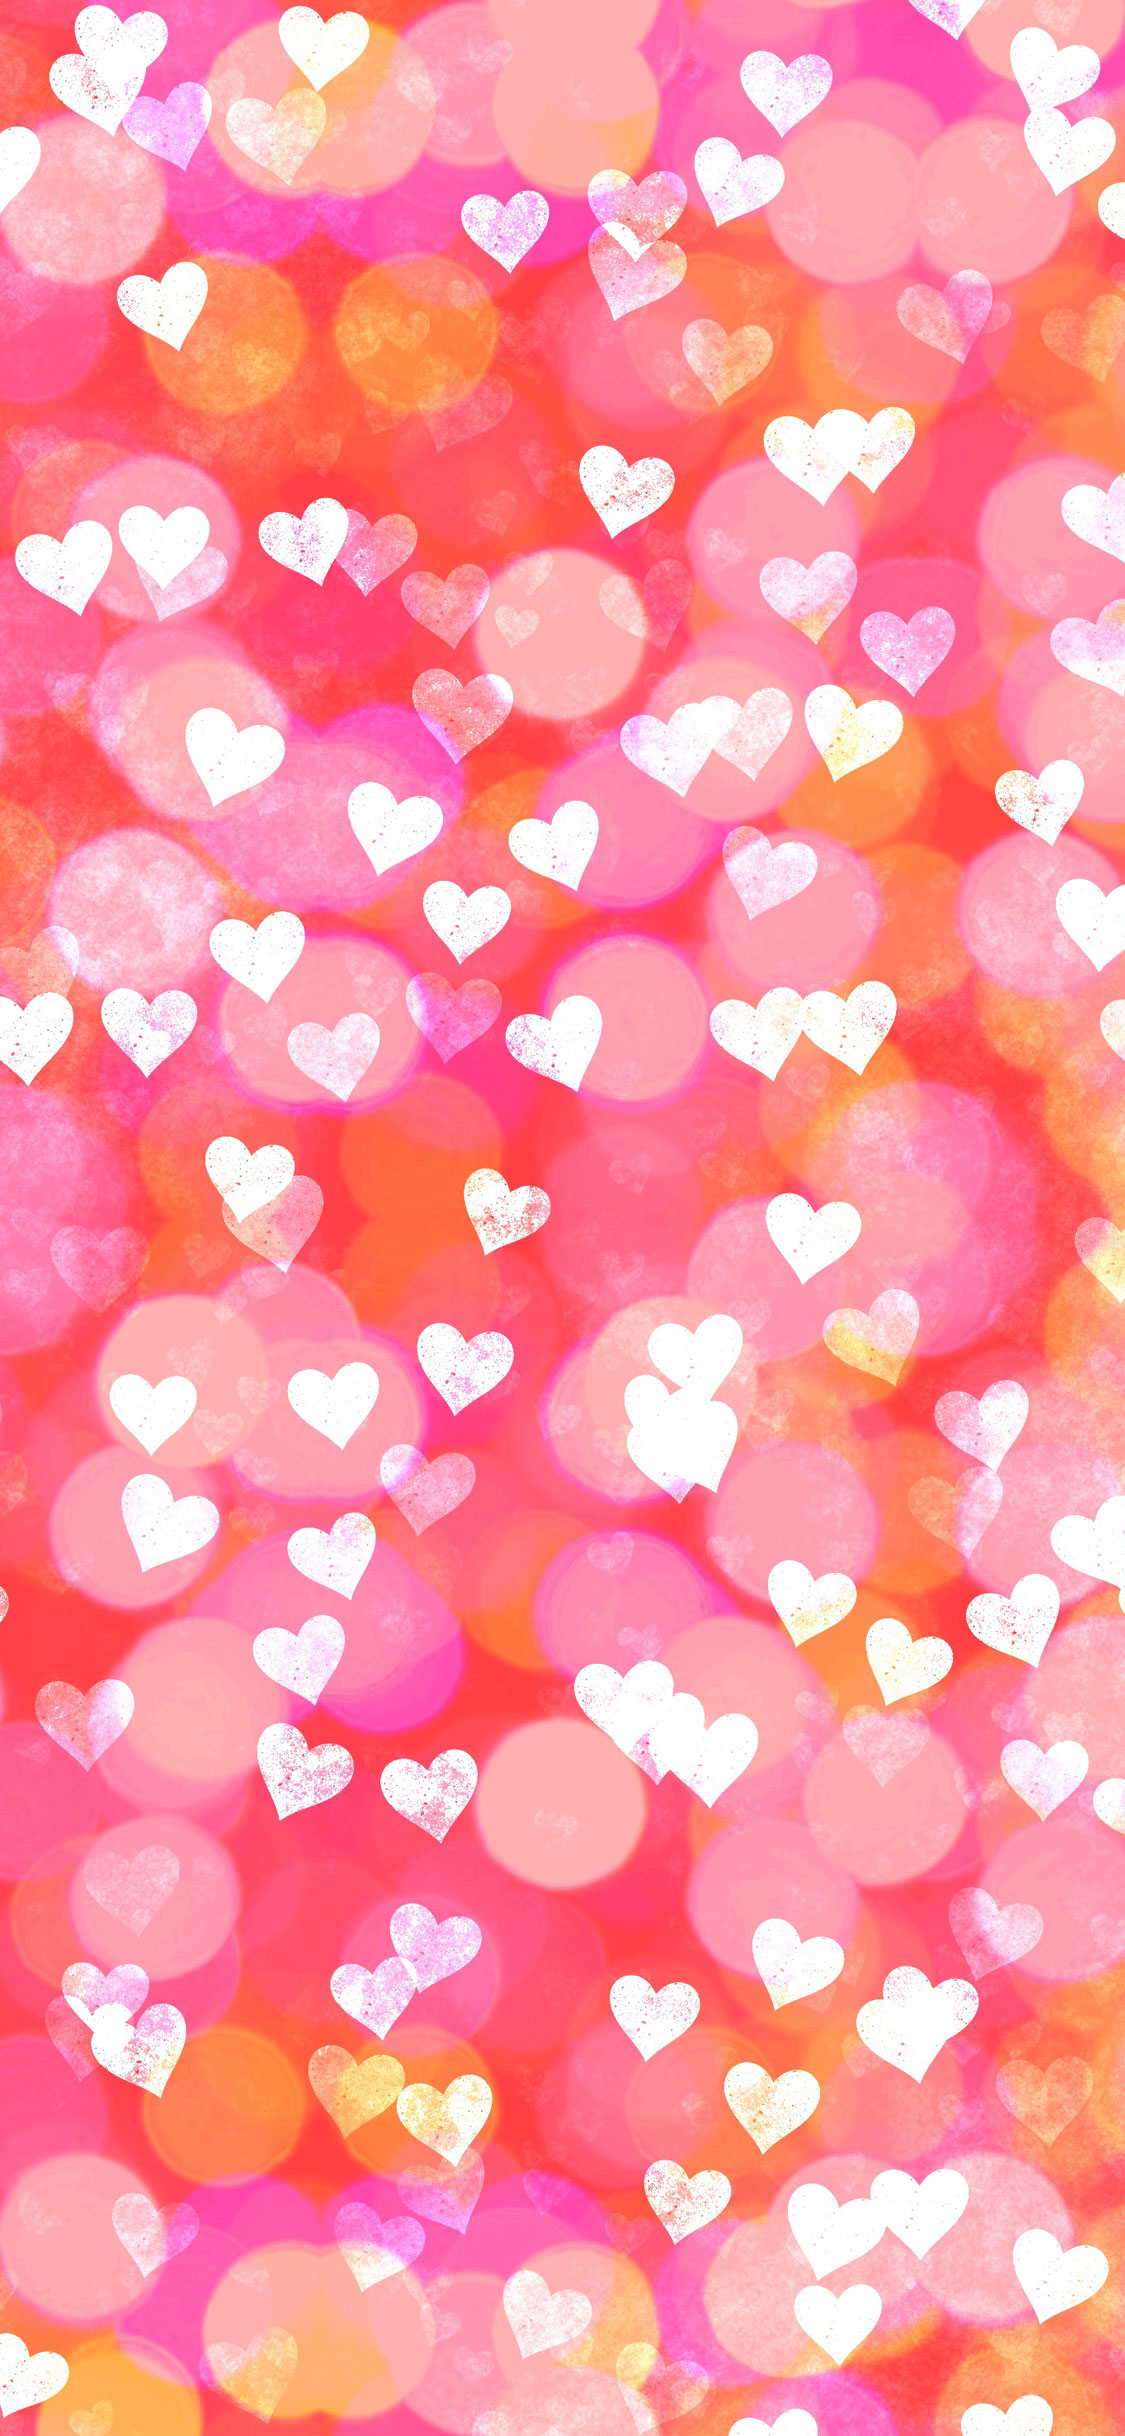 Hearts-iPhone-background